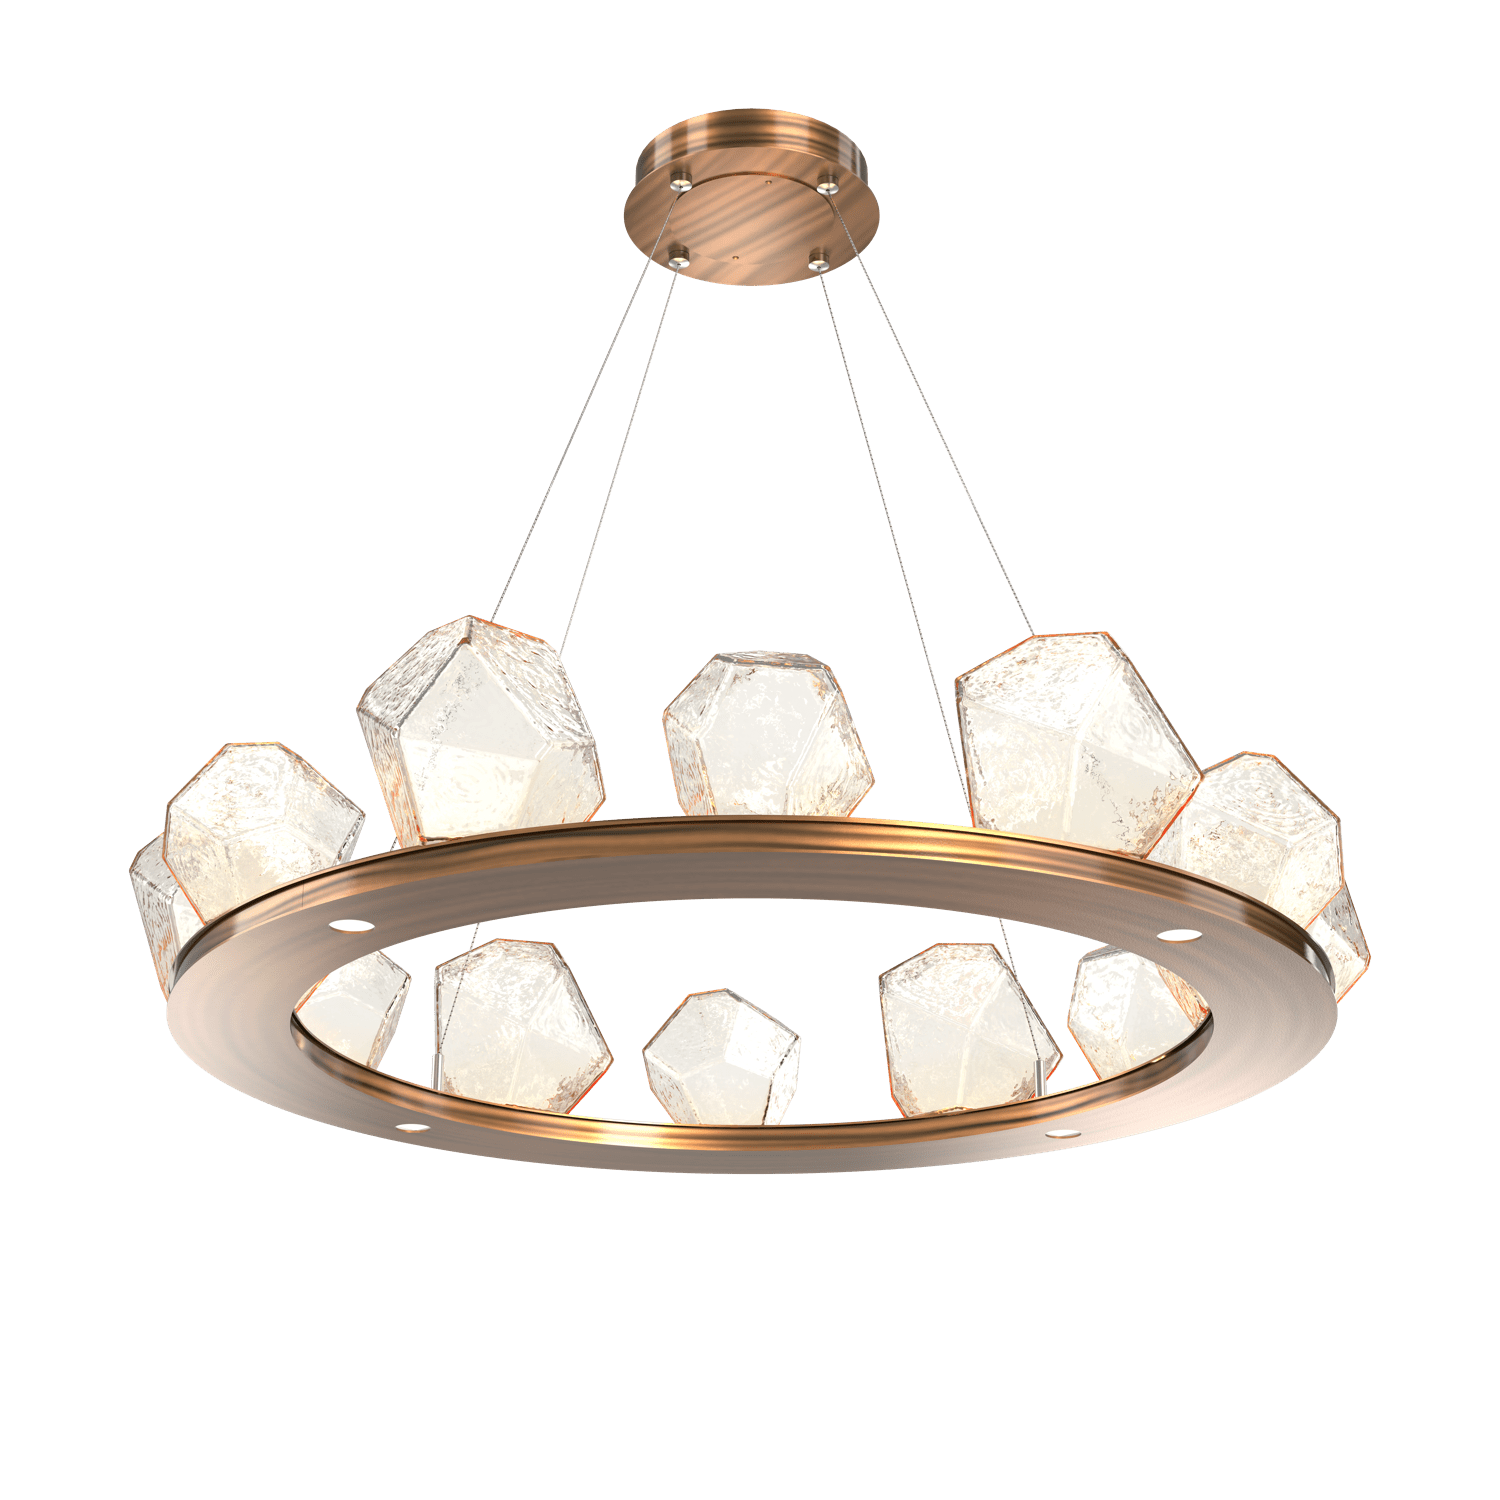 CHB0039-0C-RB-A-Hammerton-Studio-Gem-37-inch-ring-chandelier-with-oil-rubbed-bronze-finish-and-amber-blown-glass-shades-and-LED-lamping